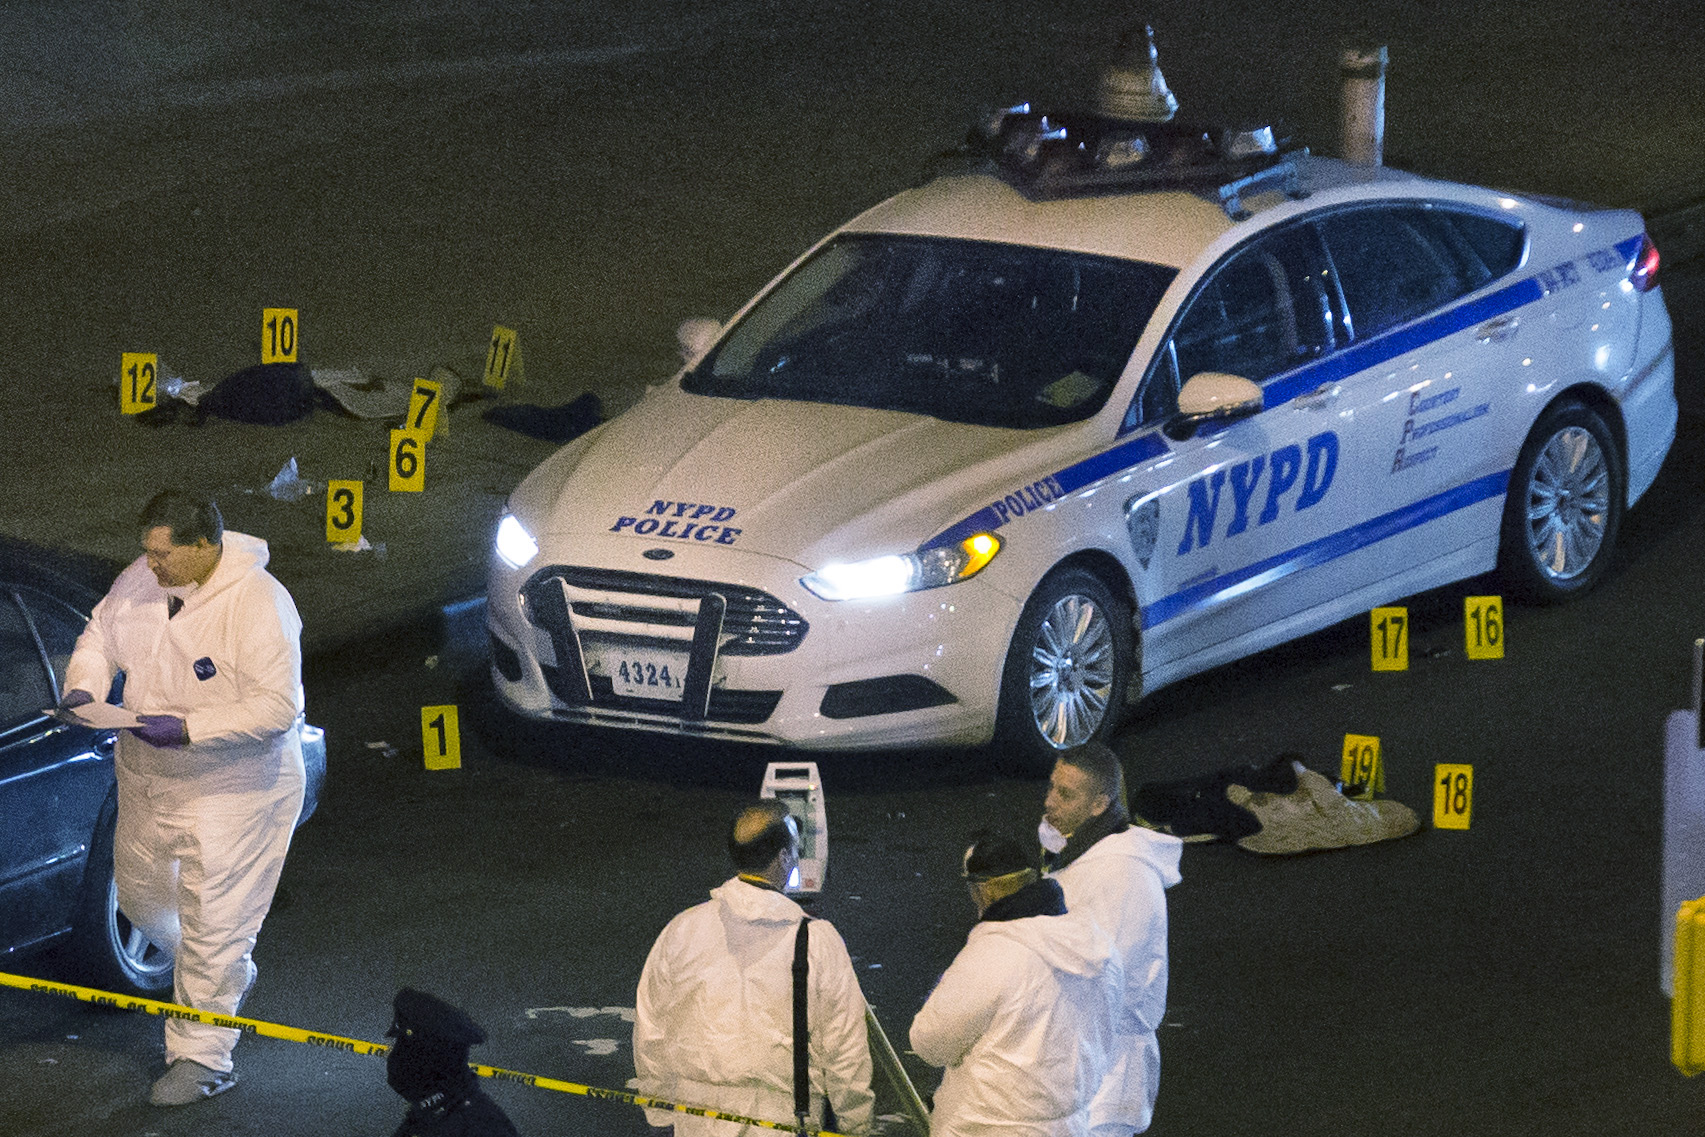 PHOTO: Bulletproof vests lie on each side of an NYPD patrol car as investigators work at the scene where two NYPD officers were shot in the Bedford-Stuyvesant neighborhood of the Brooklyn borough of New York on Saturday, Dec. 20, 2014.